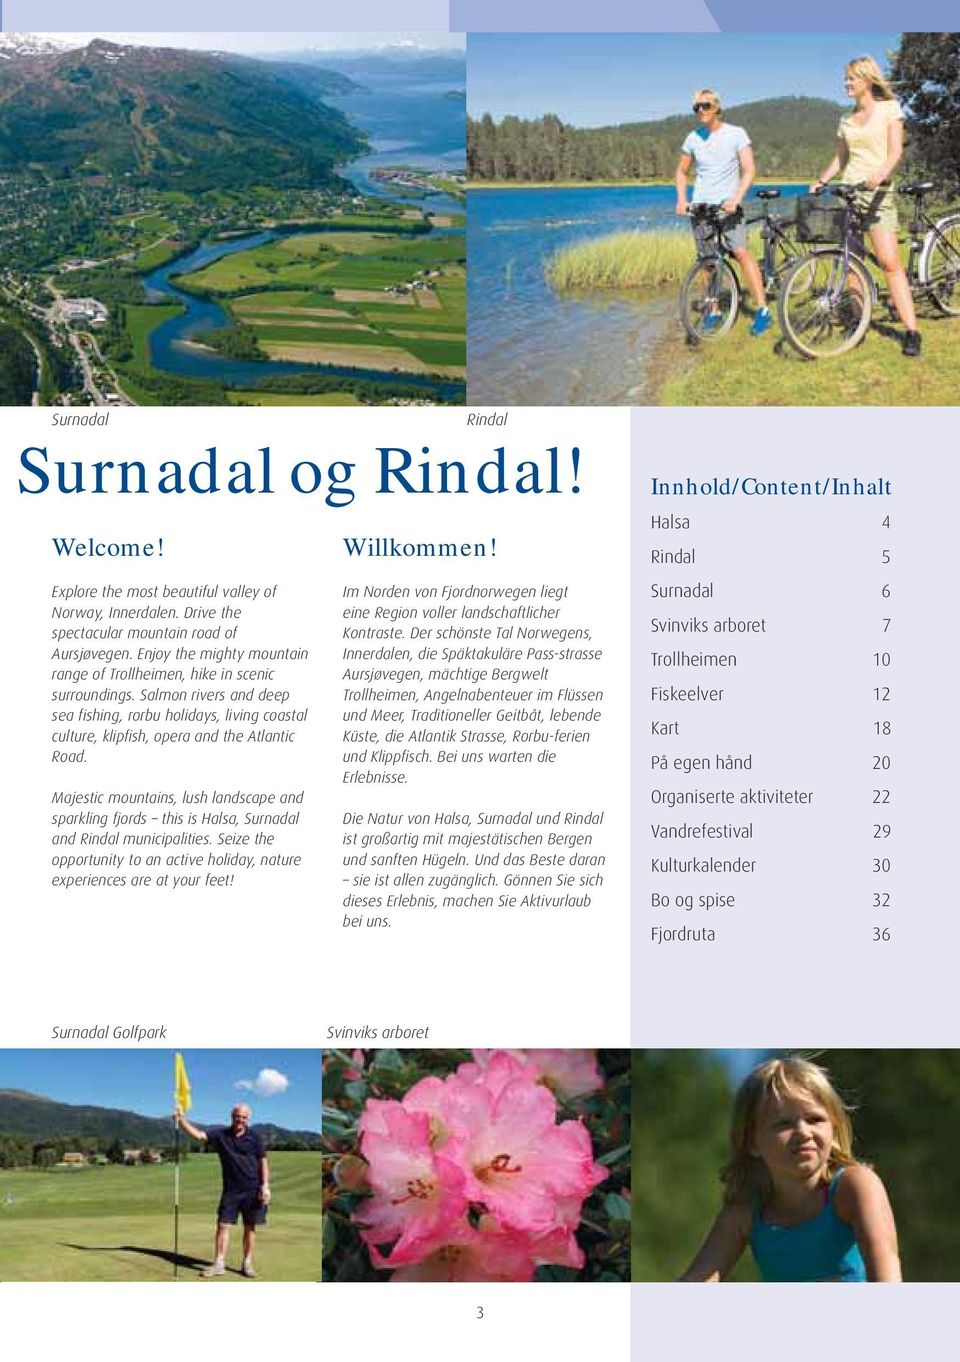 Majestic mountains, lush landscape and sparkling fjords this is Halsa, Surnadal and Rindal municipalities. Seize the opportunity to an active holiday, nature experiences are at your feet!